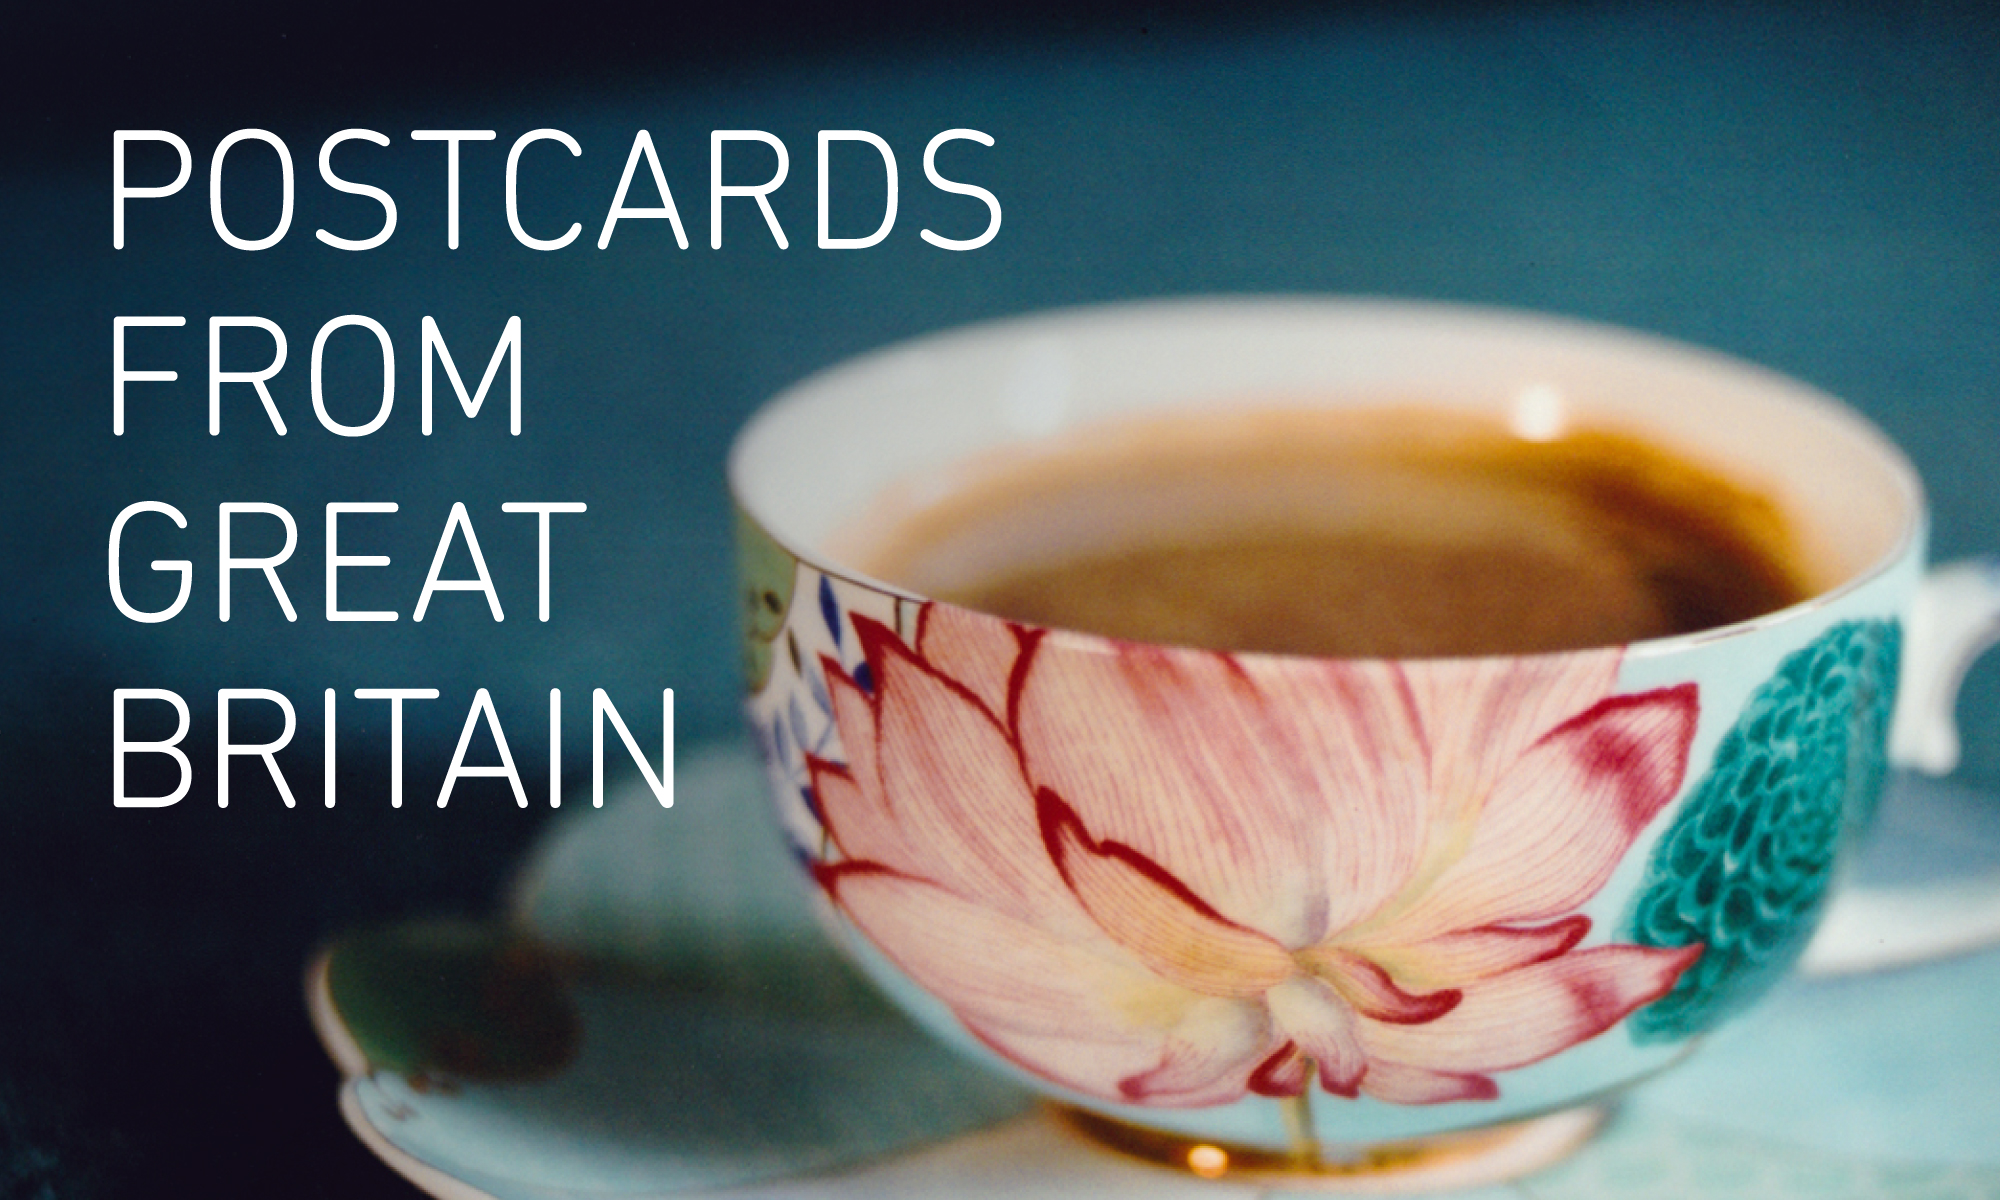 Graphic with an ornate floral patterned teacup and saucer filled with black coffee and the text 'POSTCARDS FROM GREAT BRITAIN' in white to the left.